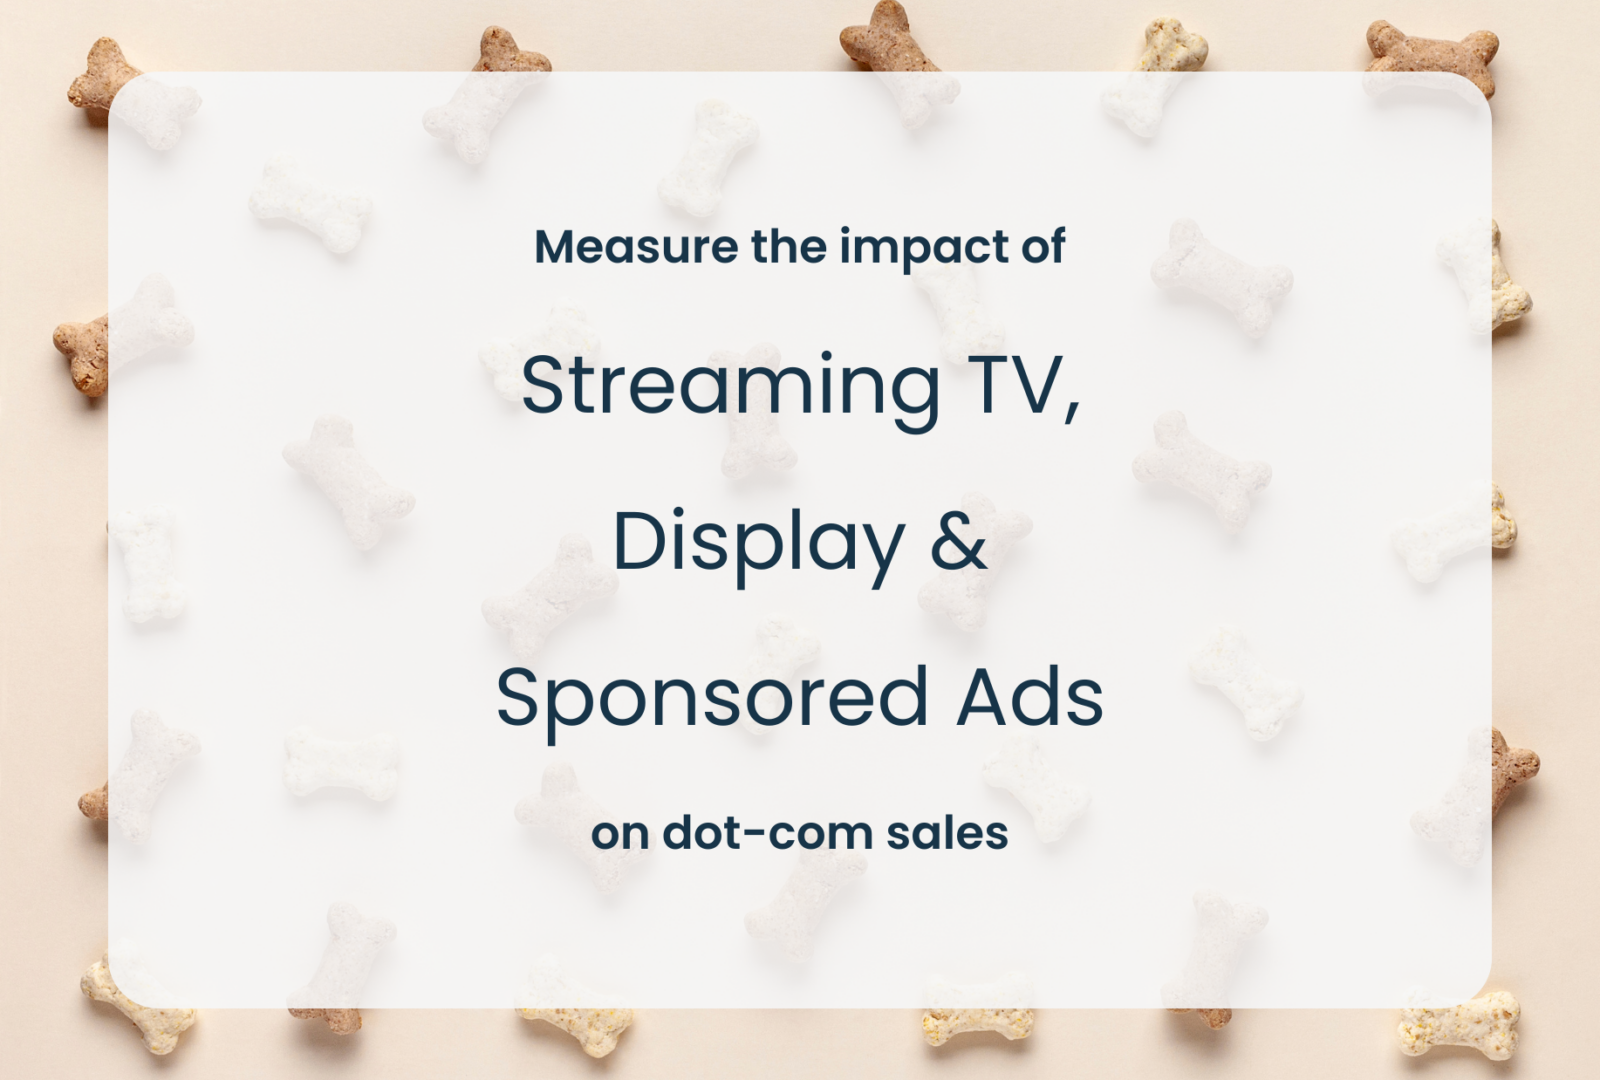 Measure the impact of streaming tv, display and sponsored ads on dot-com sales